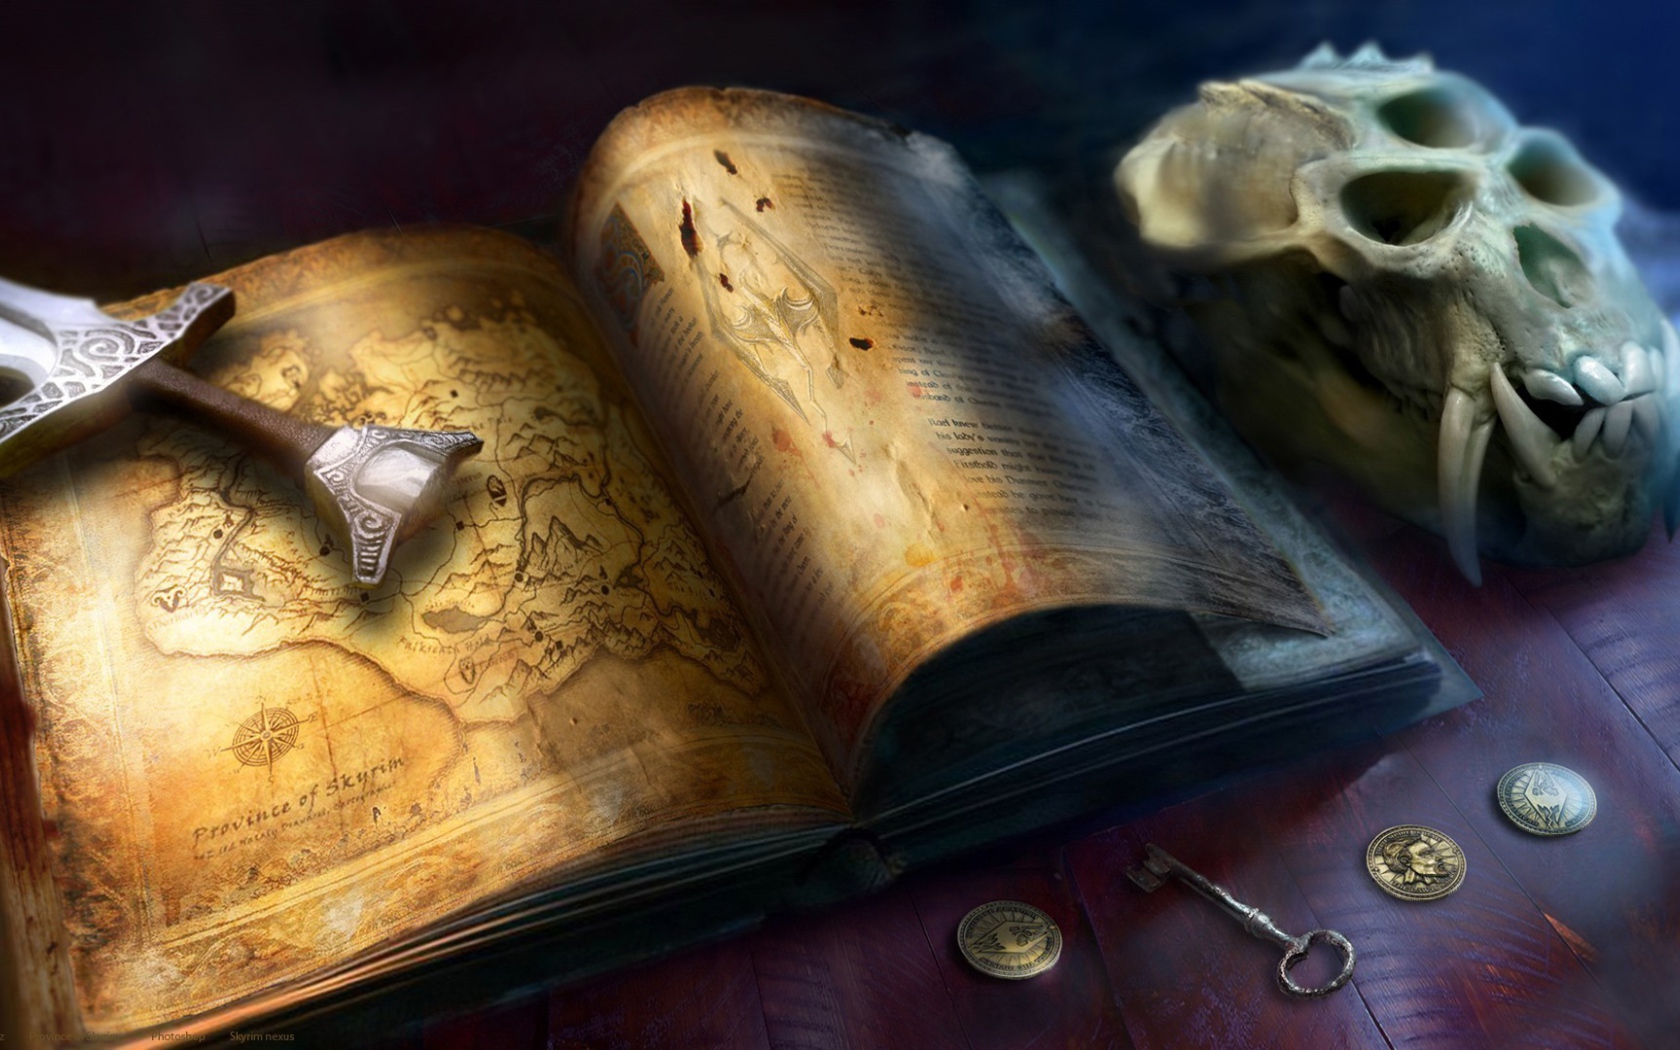 The handle of the sword on the book with maps